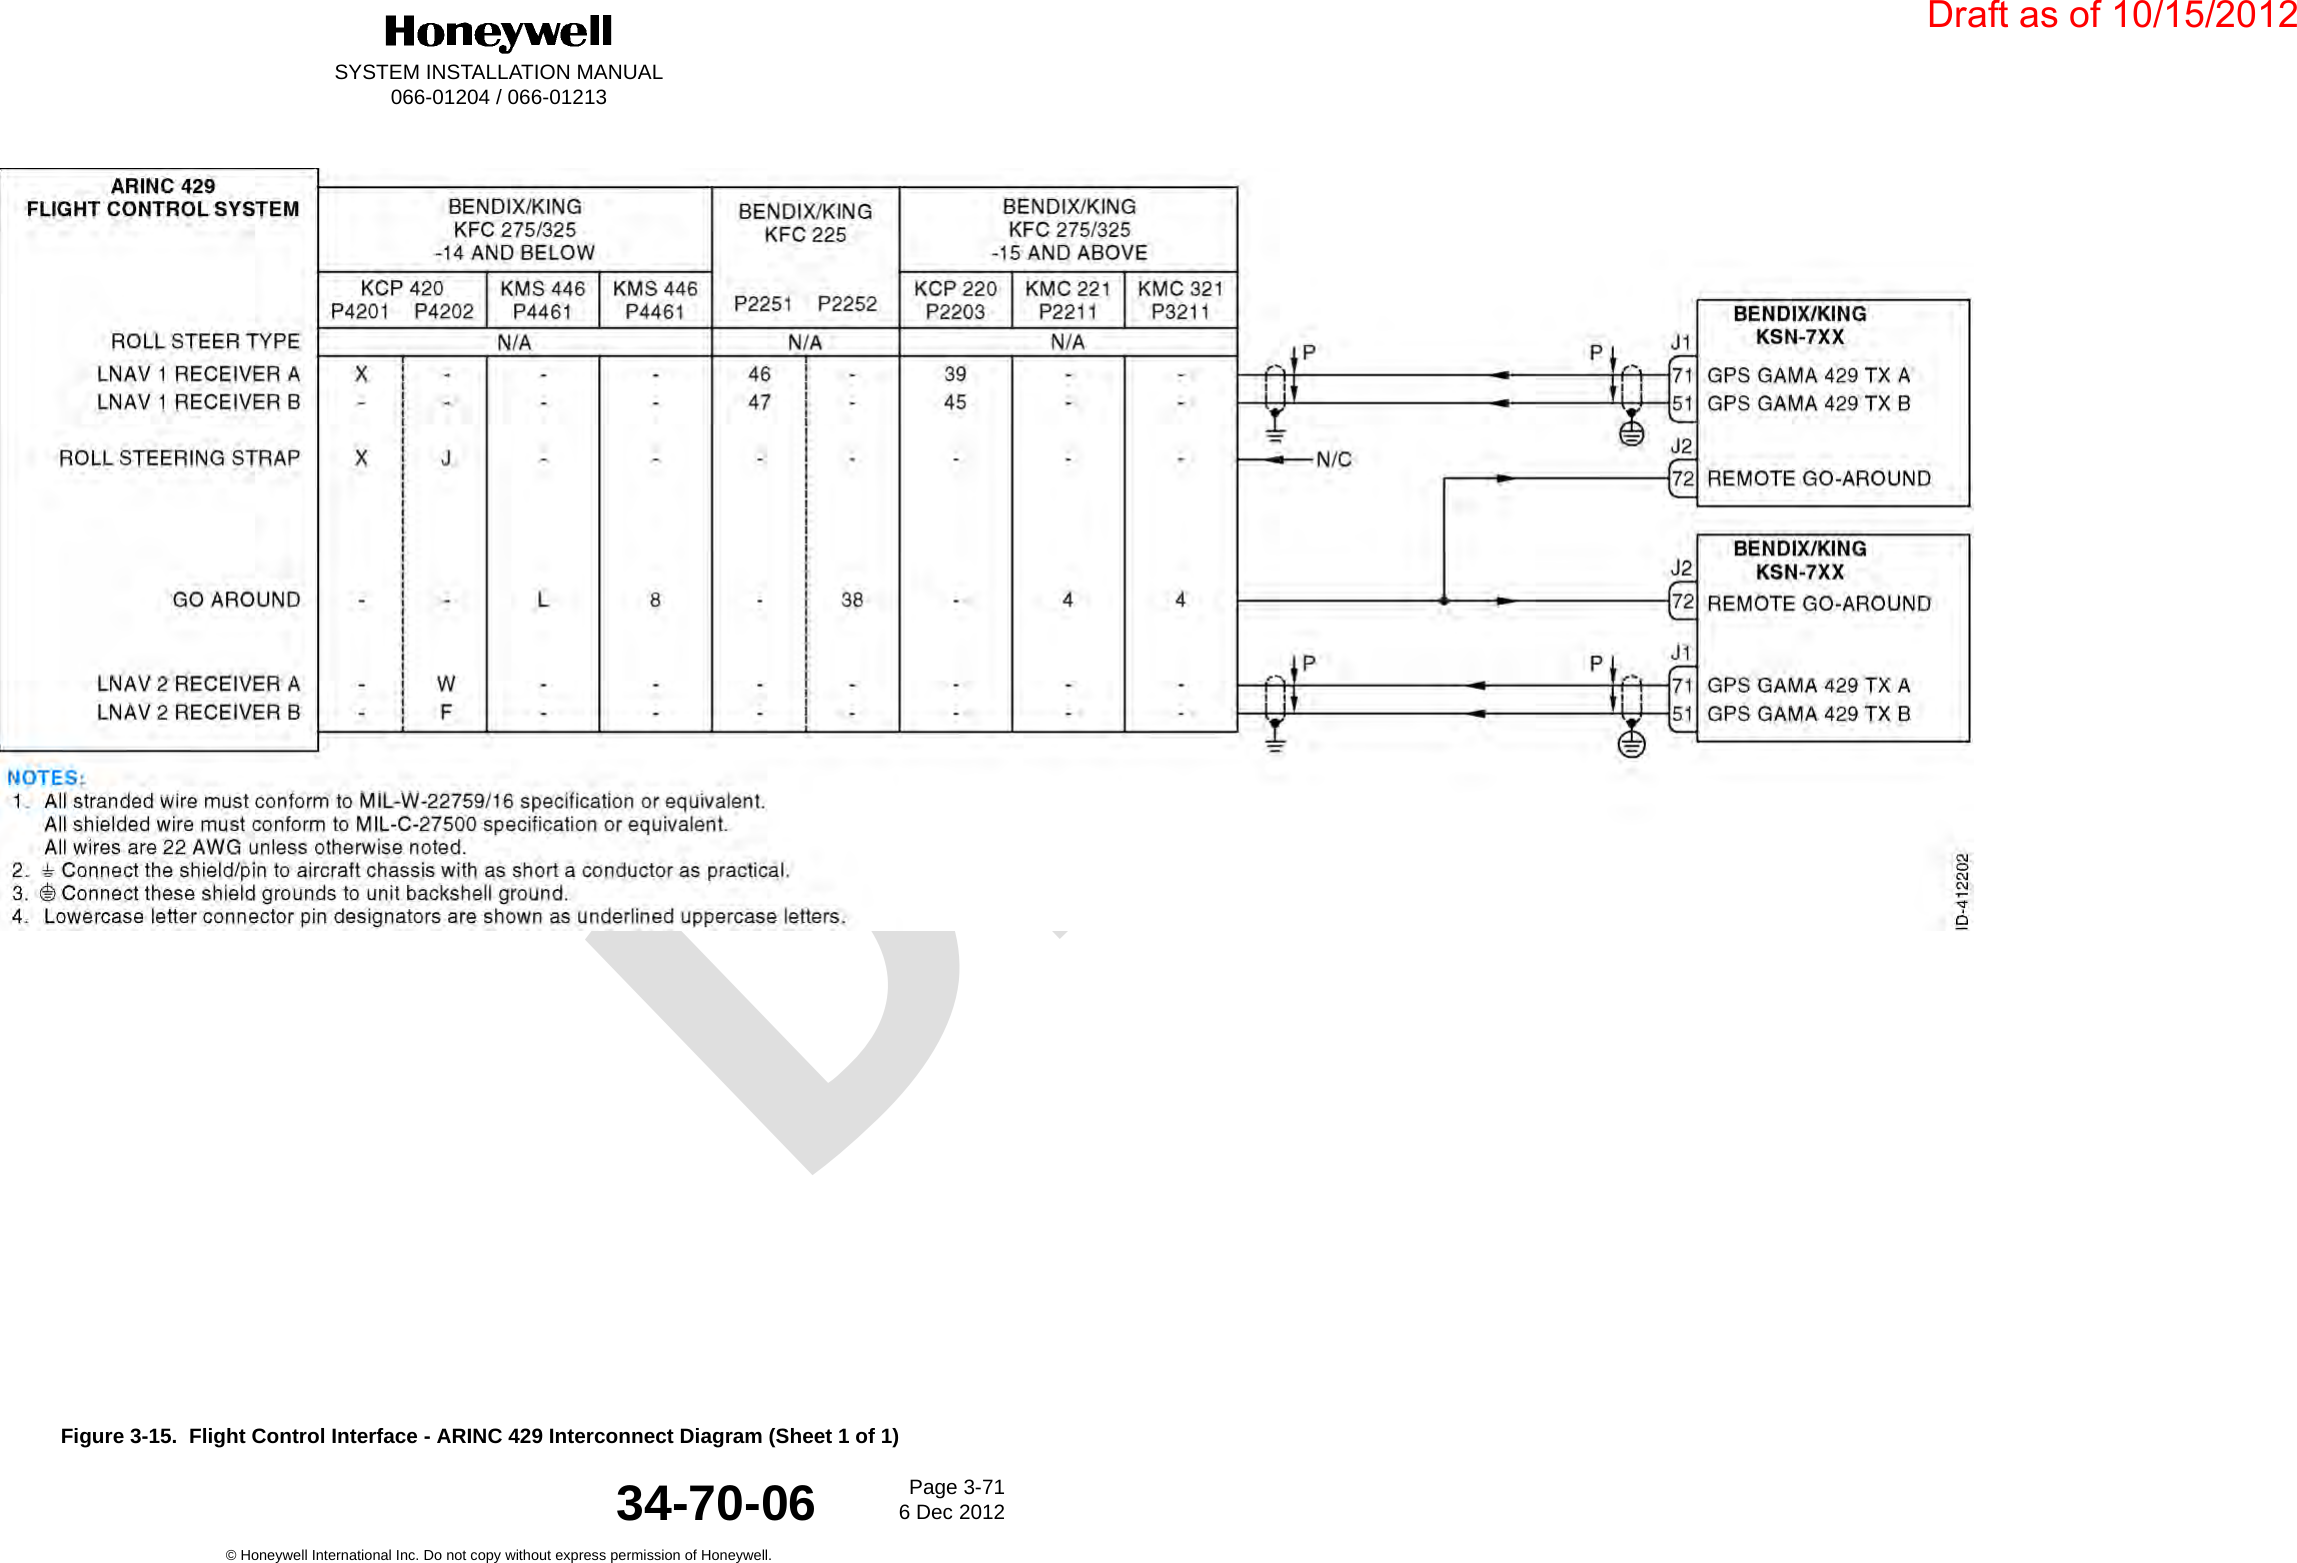 DraftSYSTEM INSTALLATION MANUAL066-01204 / 066-01213Page 3-716 Dec 2012© Honeywell International Inc. Do not copy without express permission of Honeywell.34-70-06Figure 3-15.  Flight Control Interface - ARINC 429 Interconnect Diagram (Sheet 1 of 1)Draft as of 10/15/2012